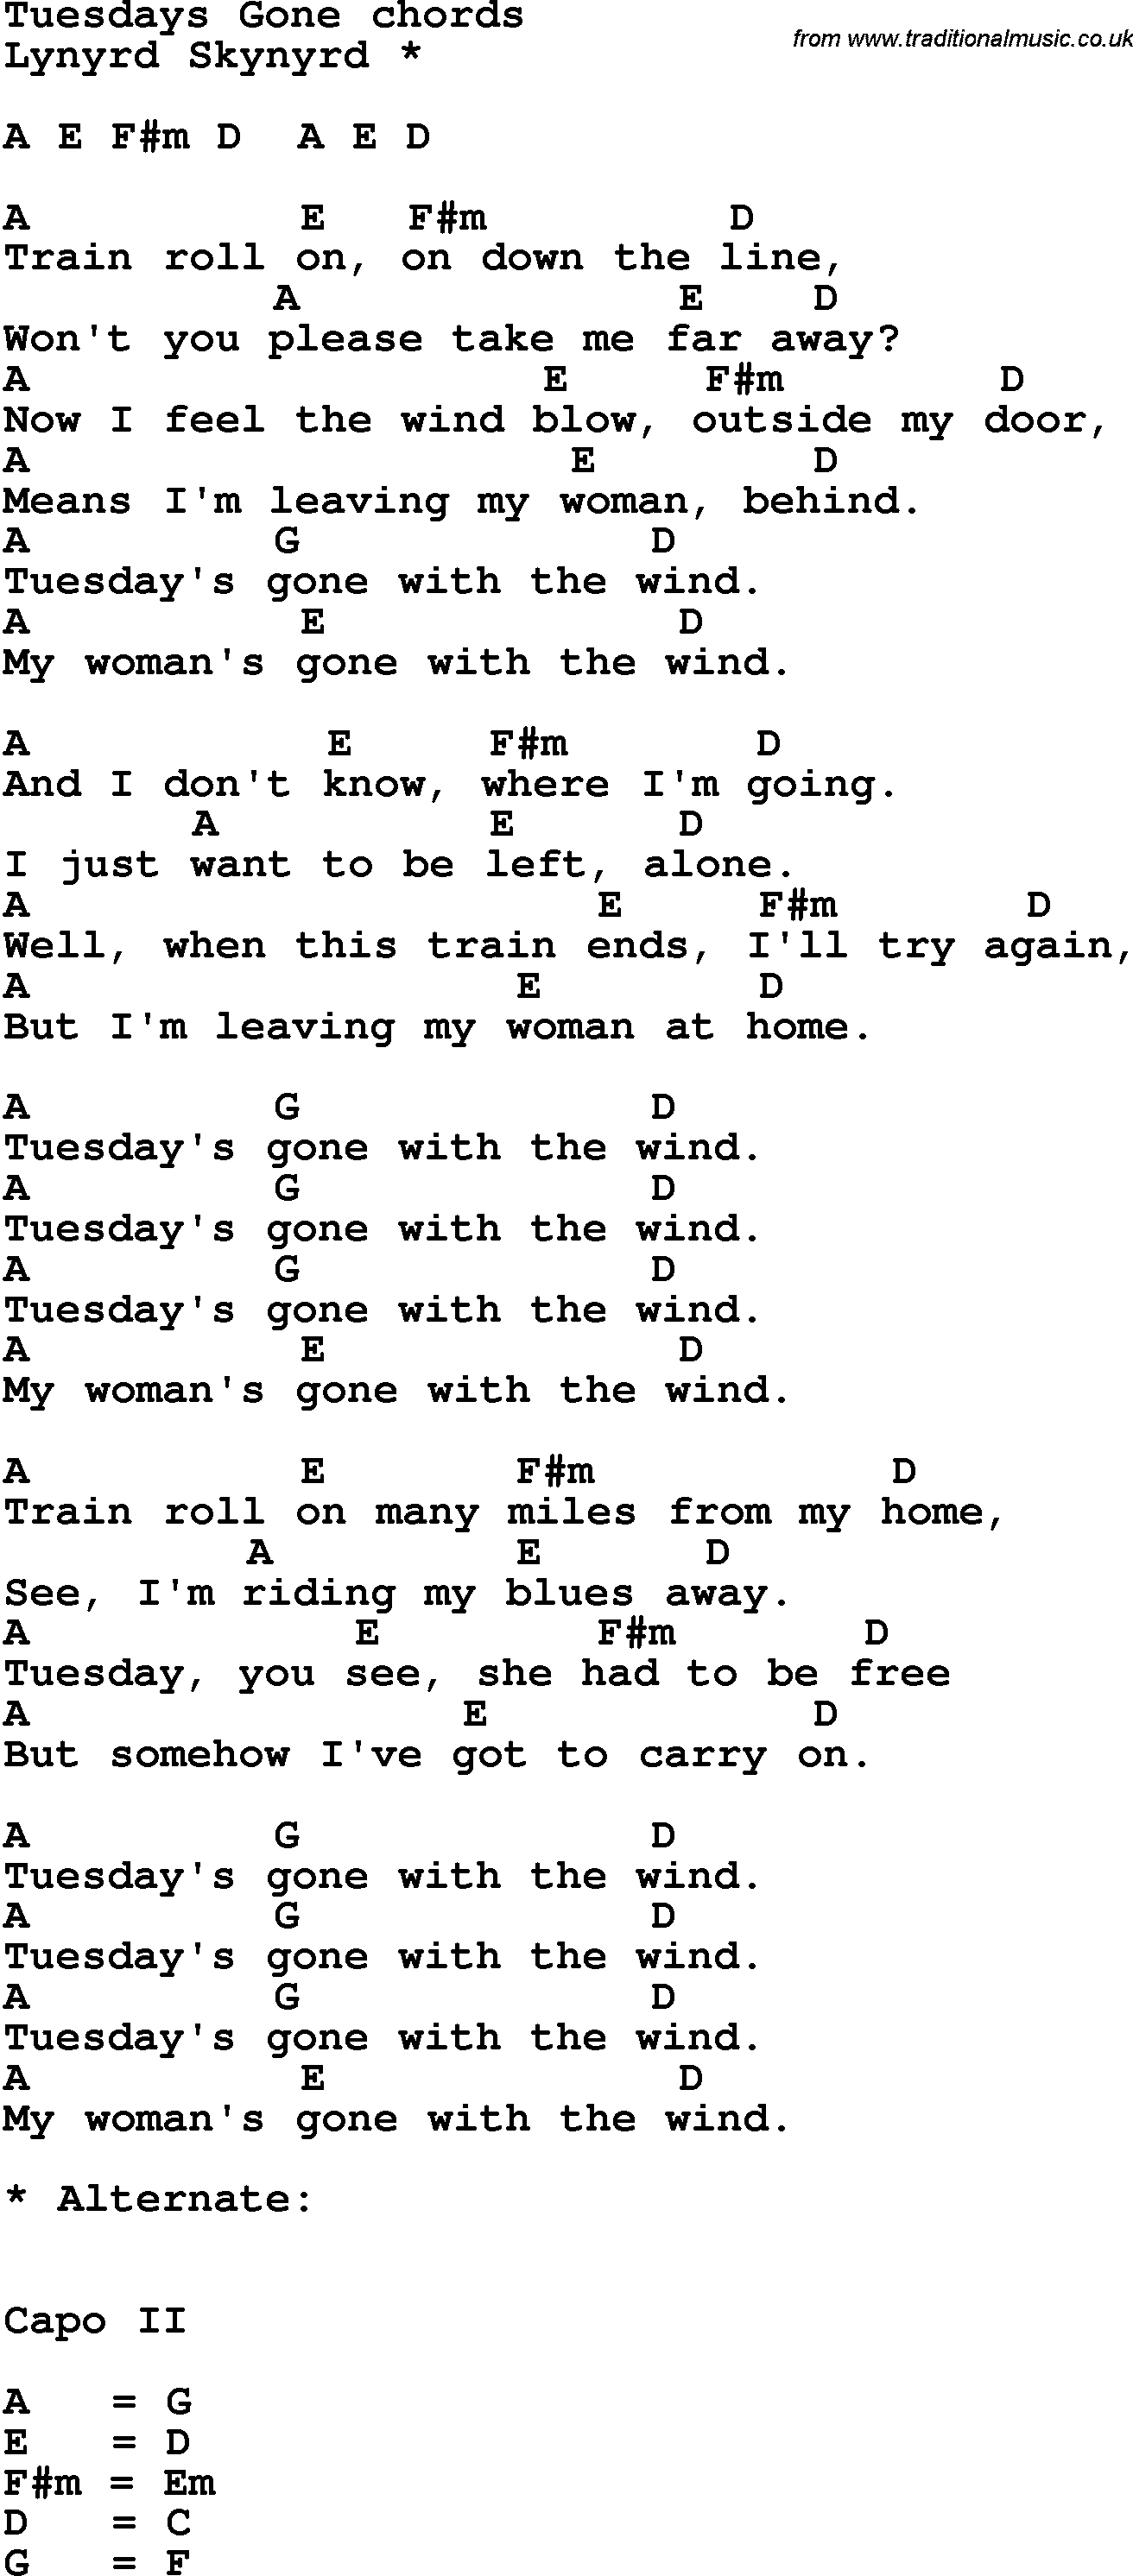 Song Lyrics with guitar chords for Tuesday's Gone